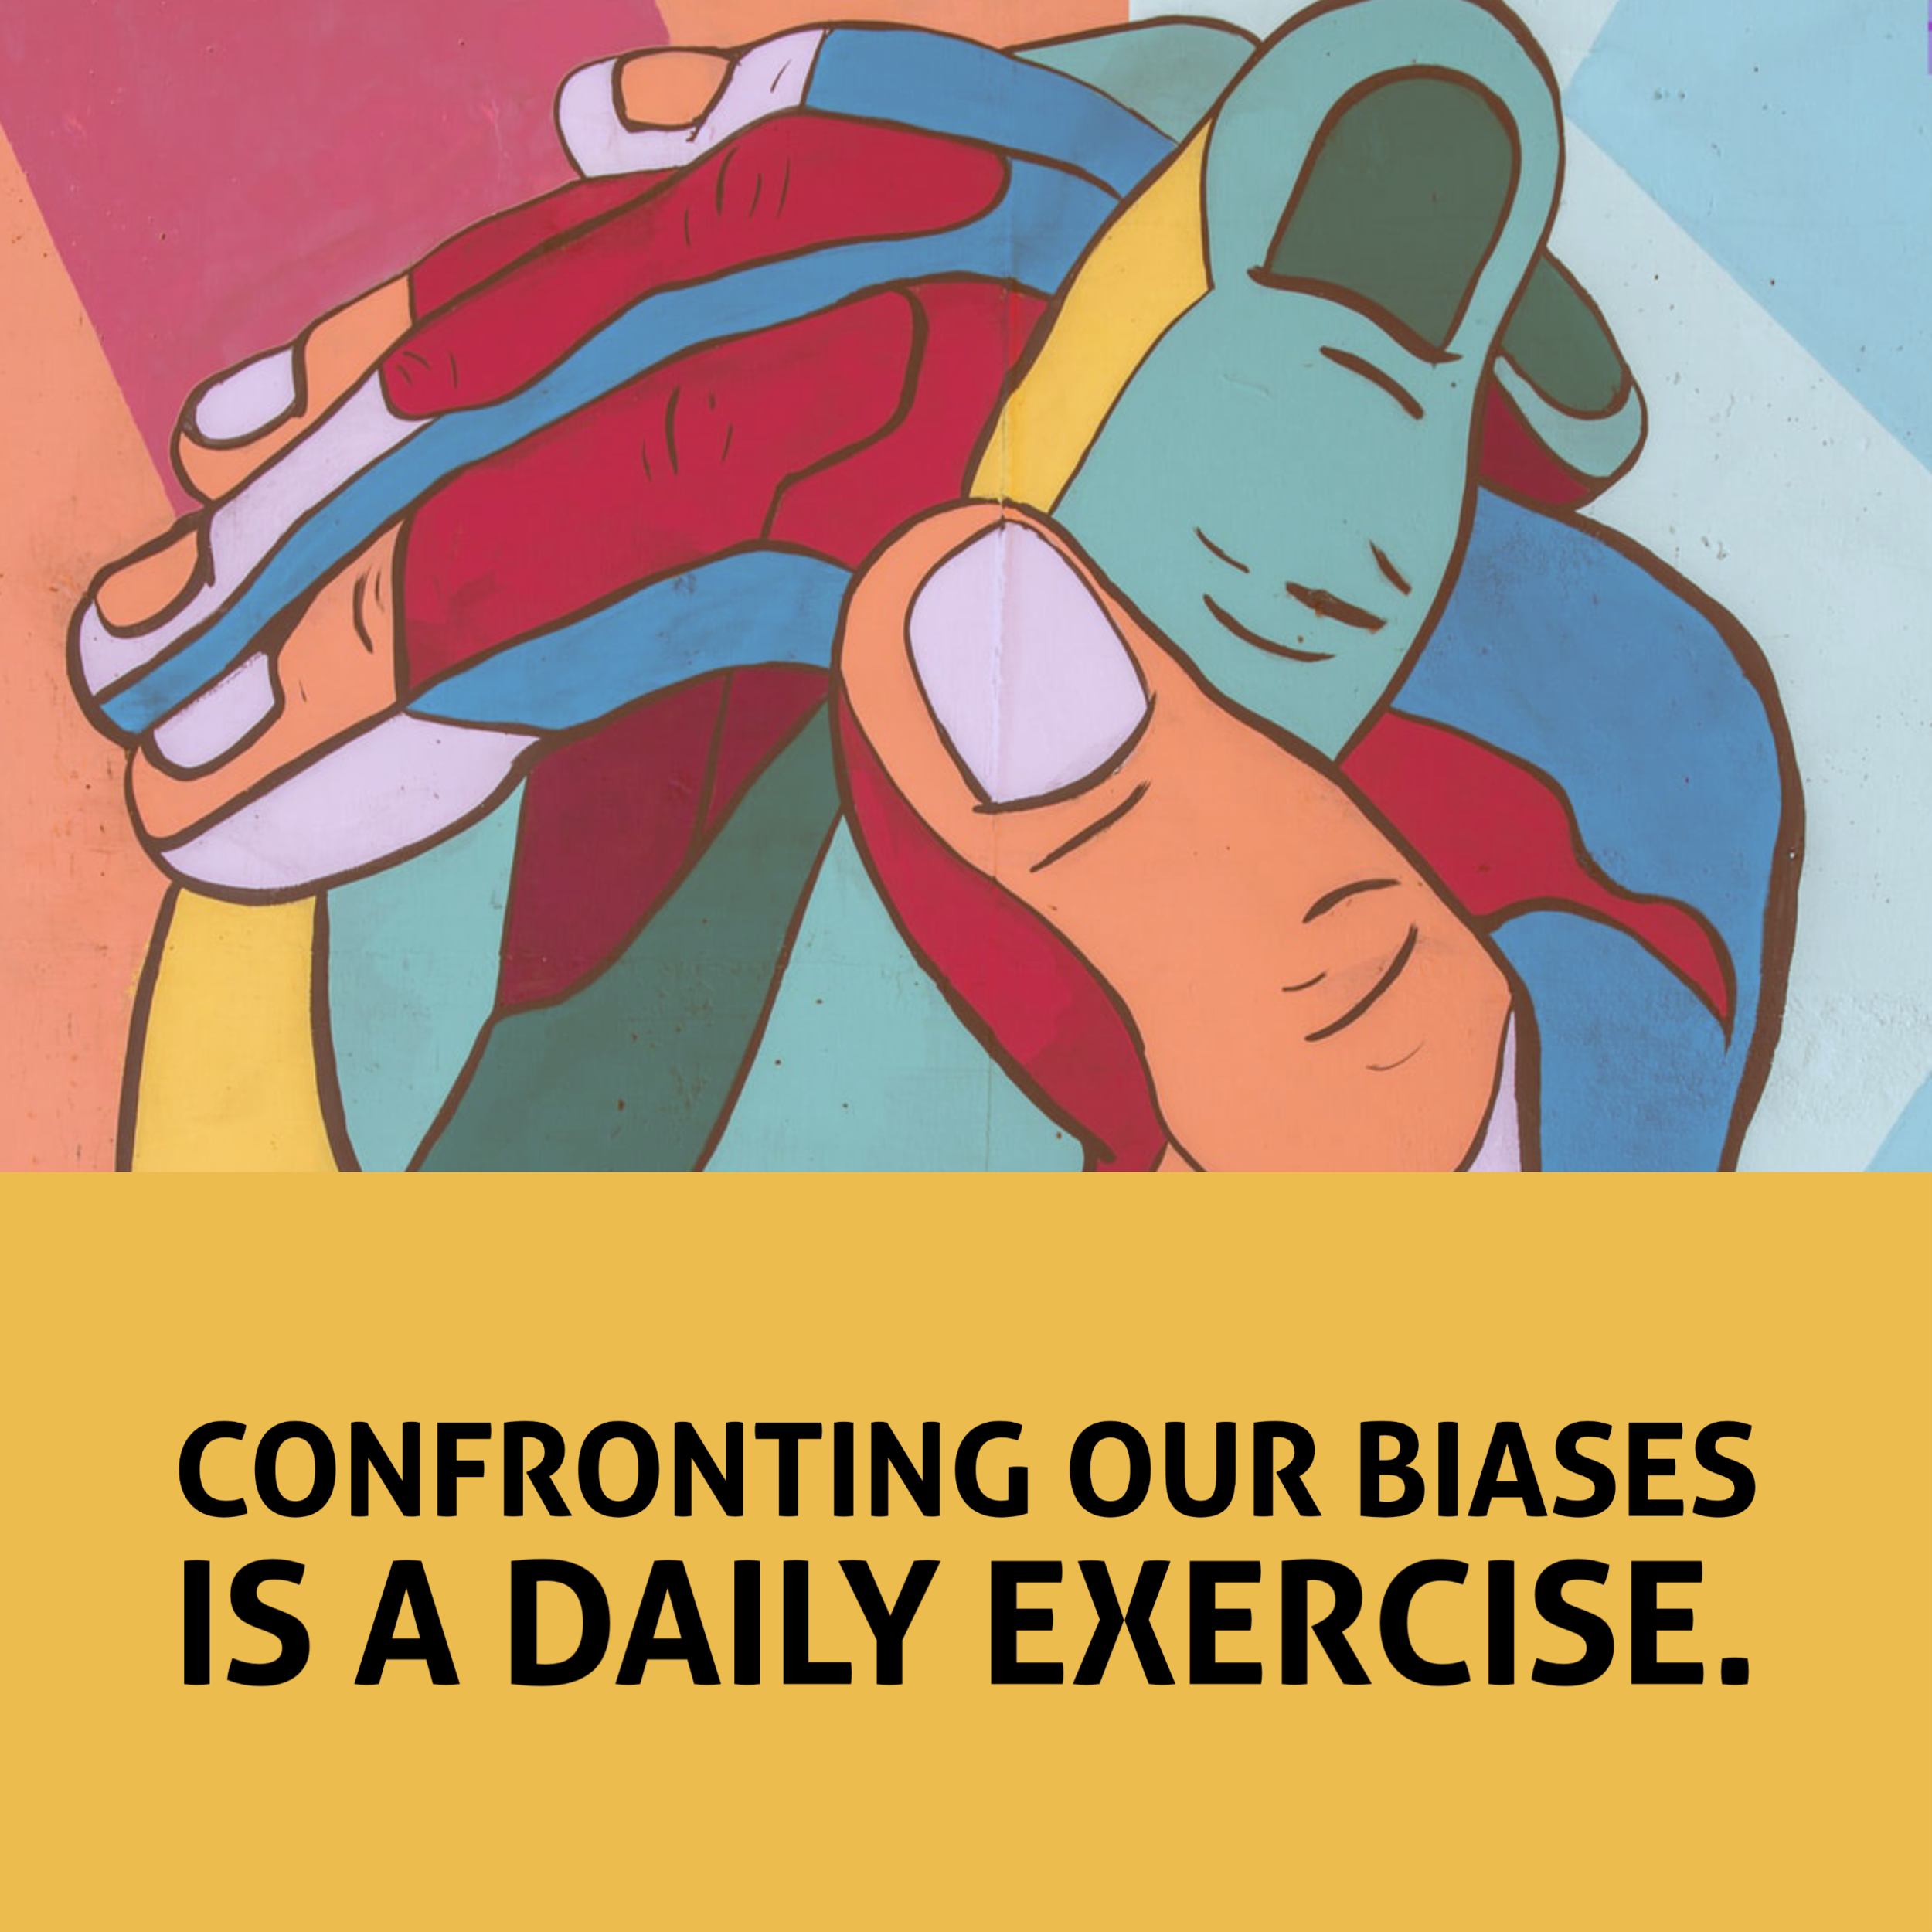 Confronting our biases is a daily exercise.